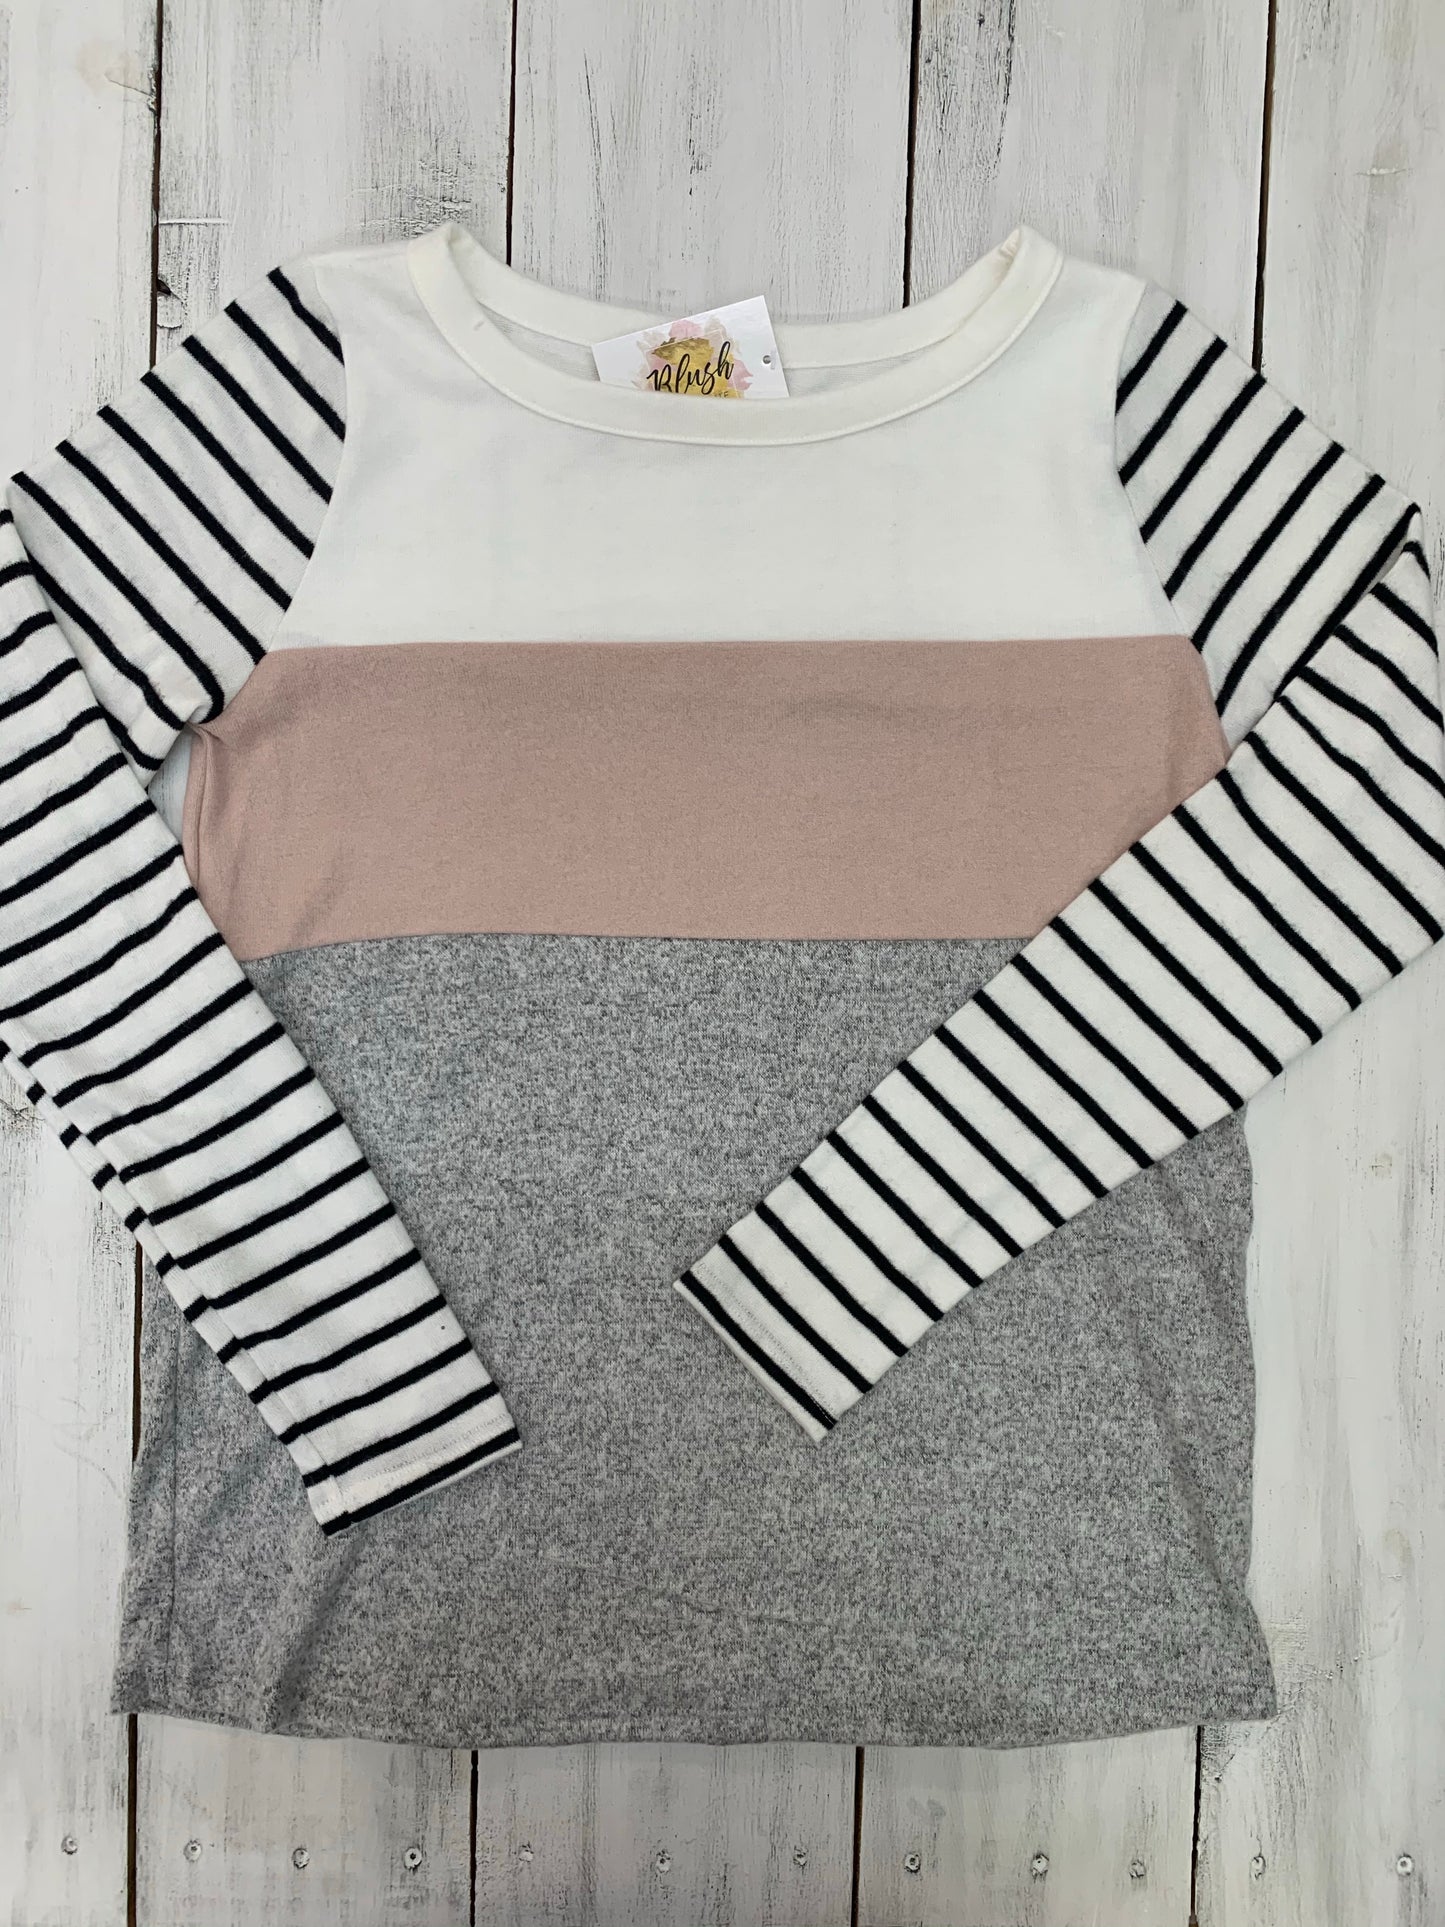 Striped Sleeve Top